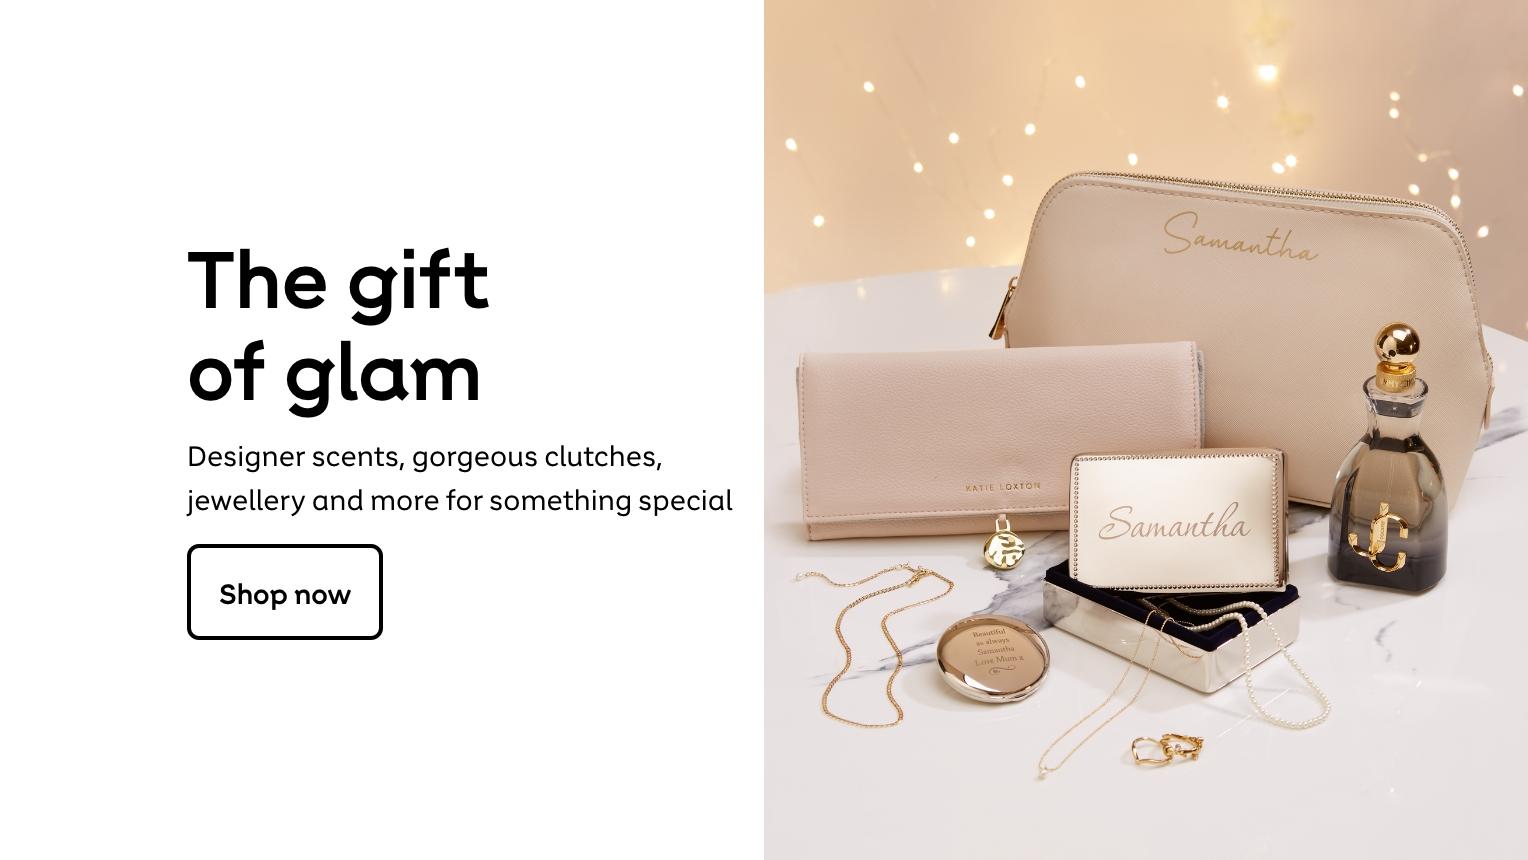 The gift of glam. Designer scents, gorgeous clutches, jewellery and more for something special. Shop now